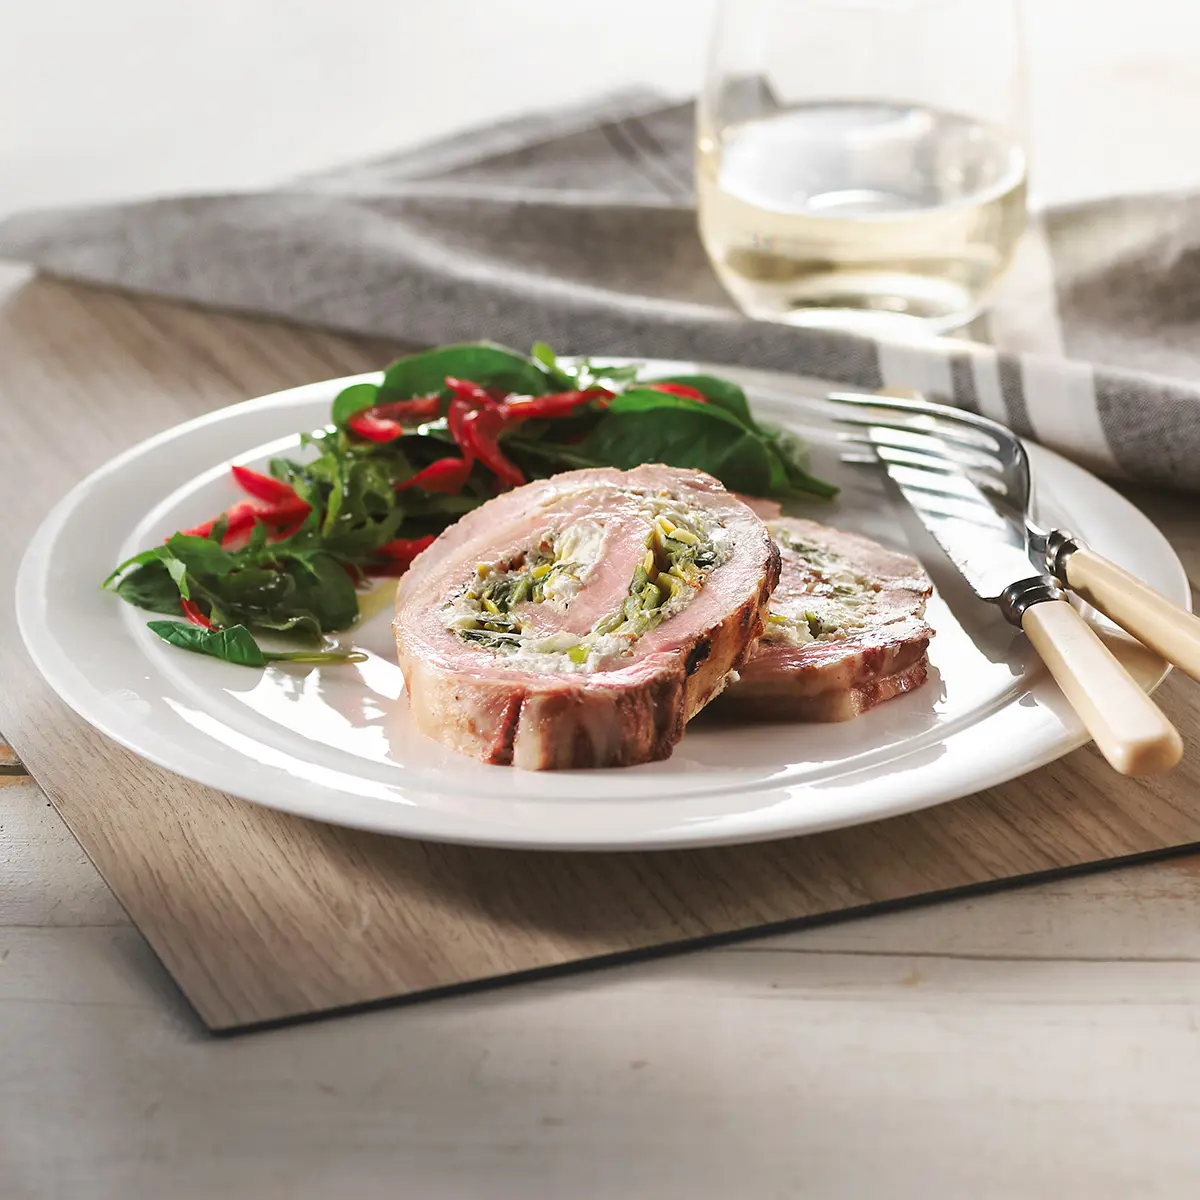 Grilled pork loin with leeks and goat cheese